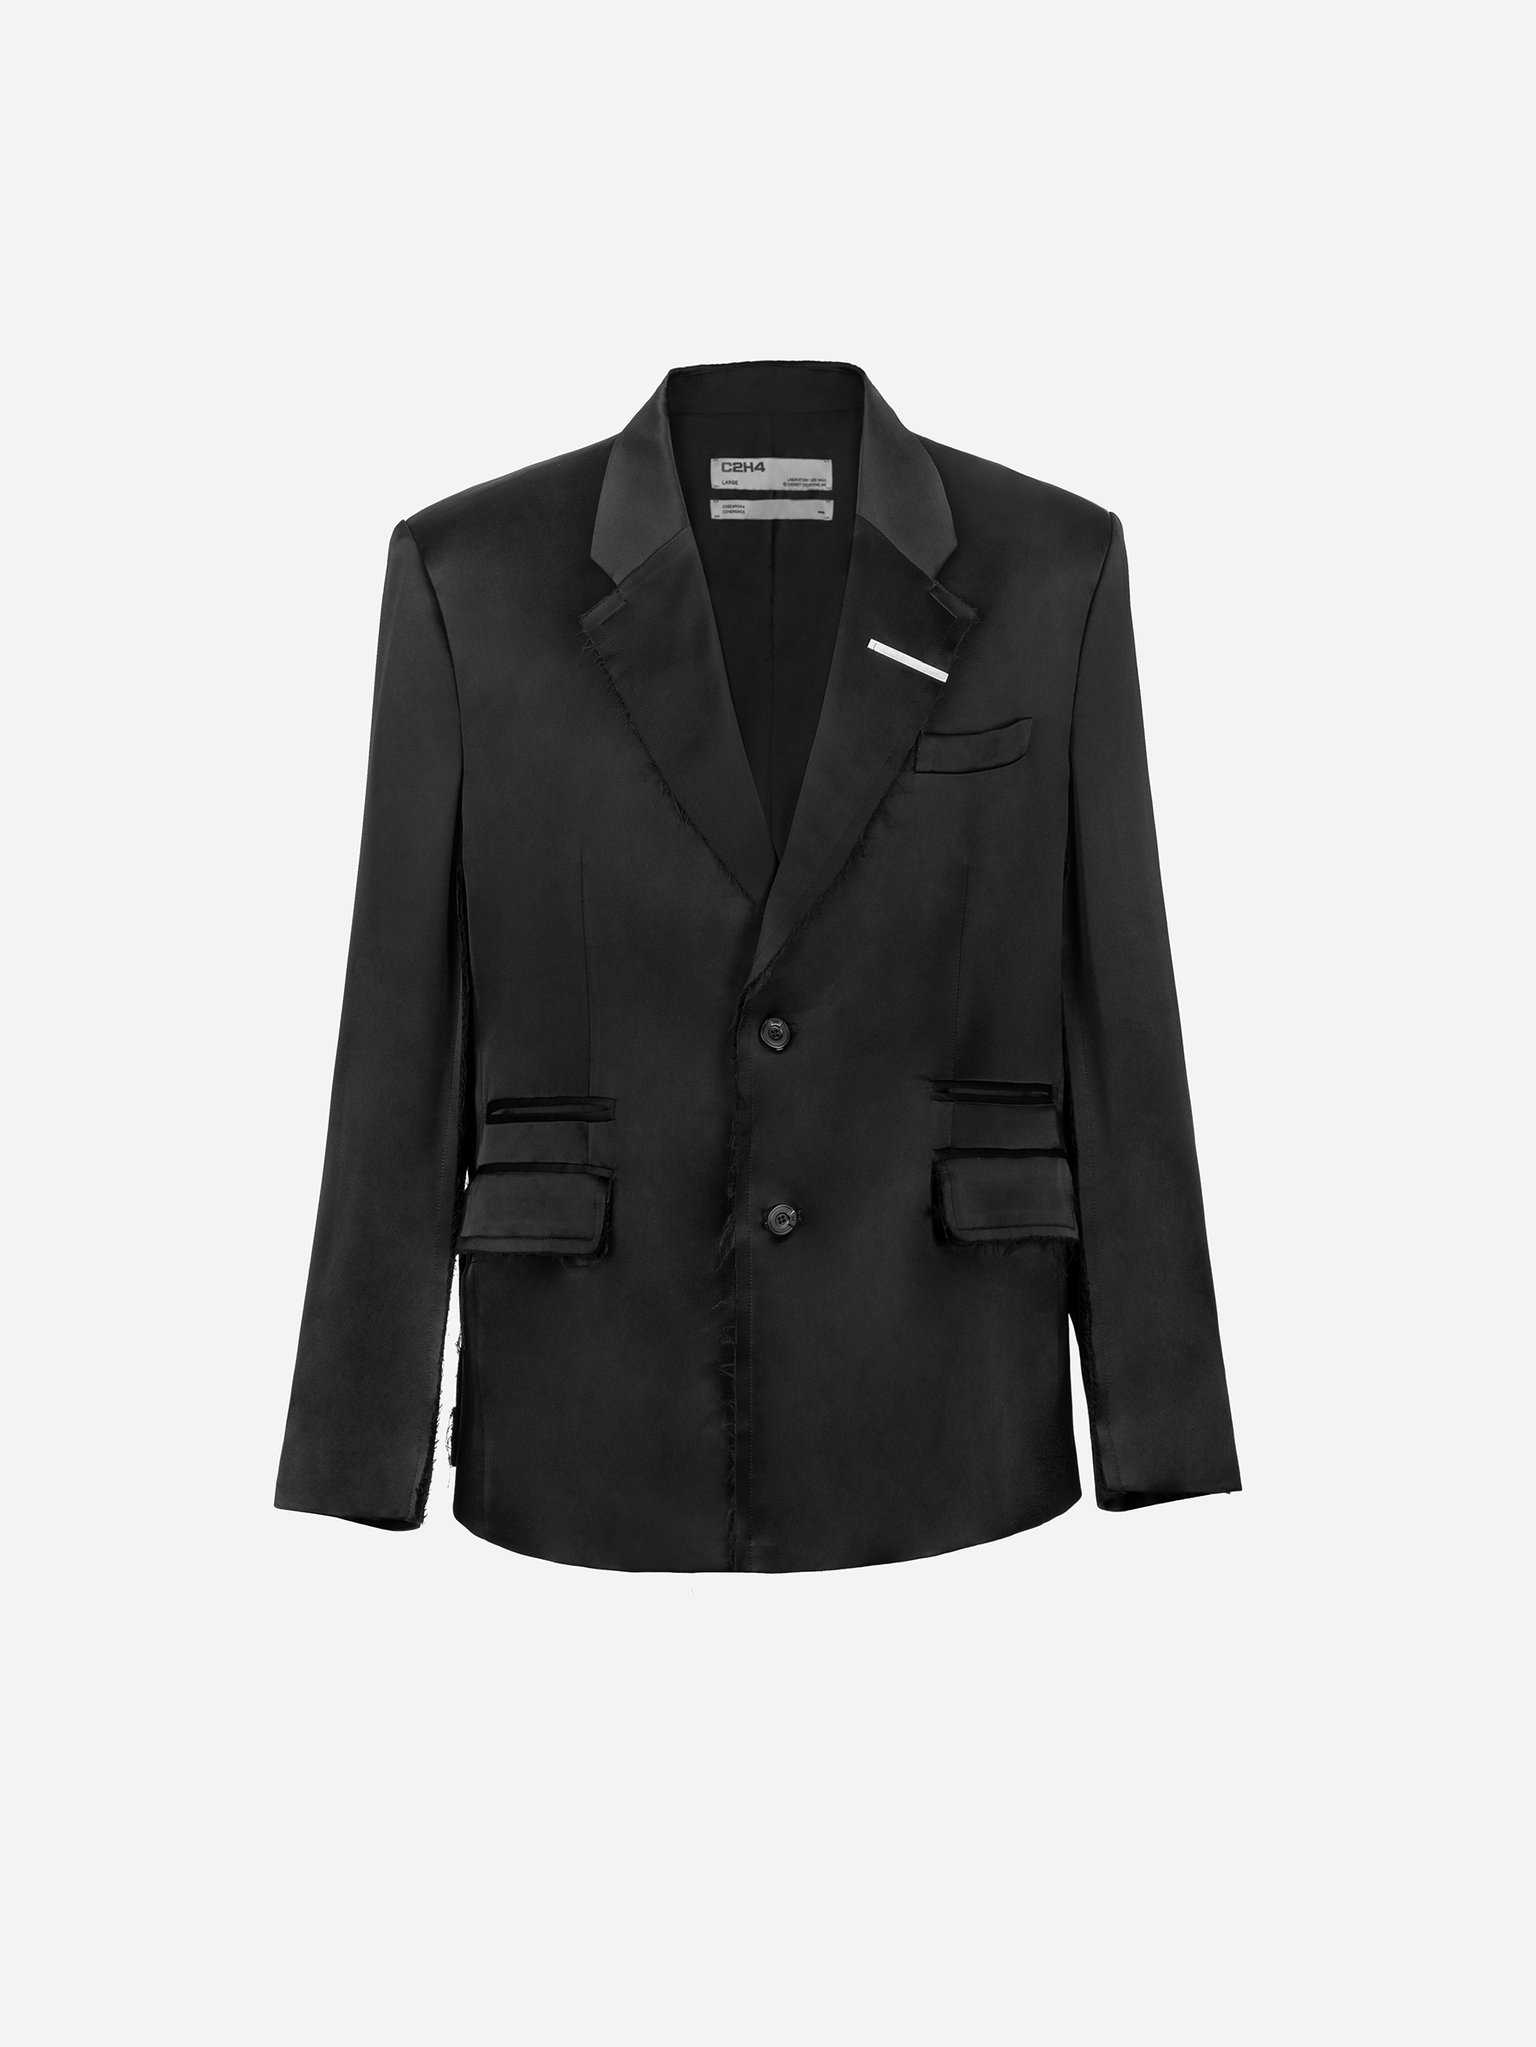 Inside-out Panelled Smoke Tailored Jacket